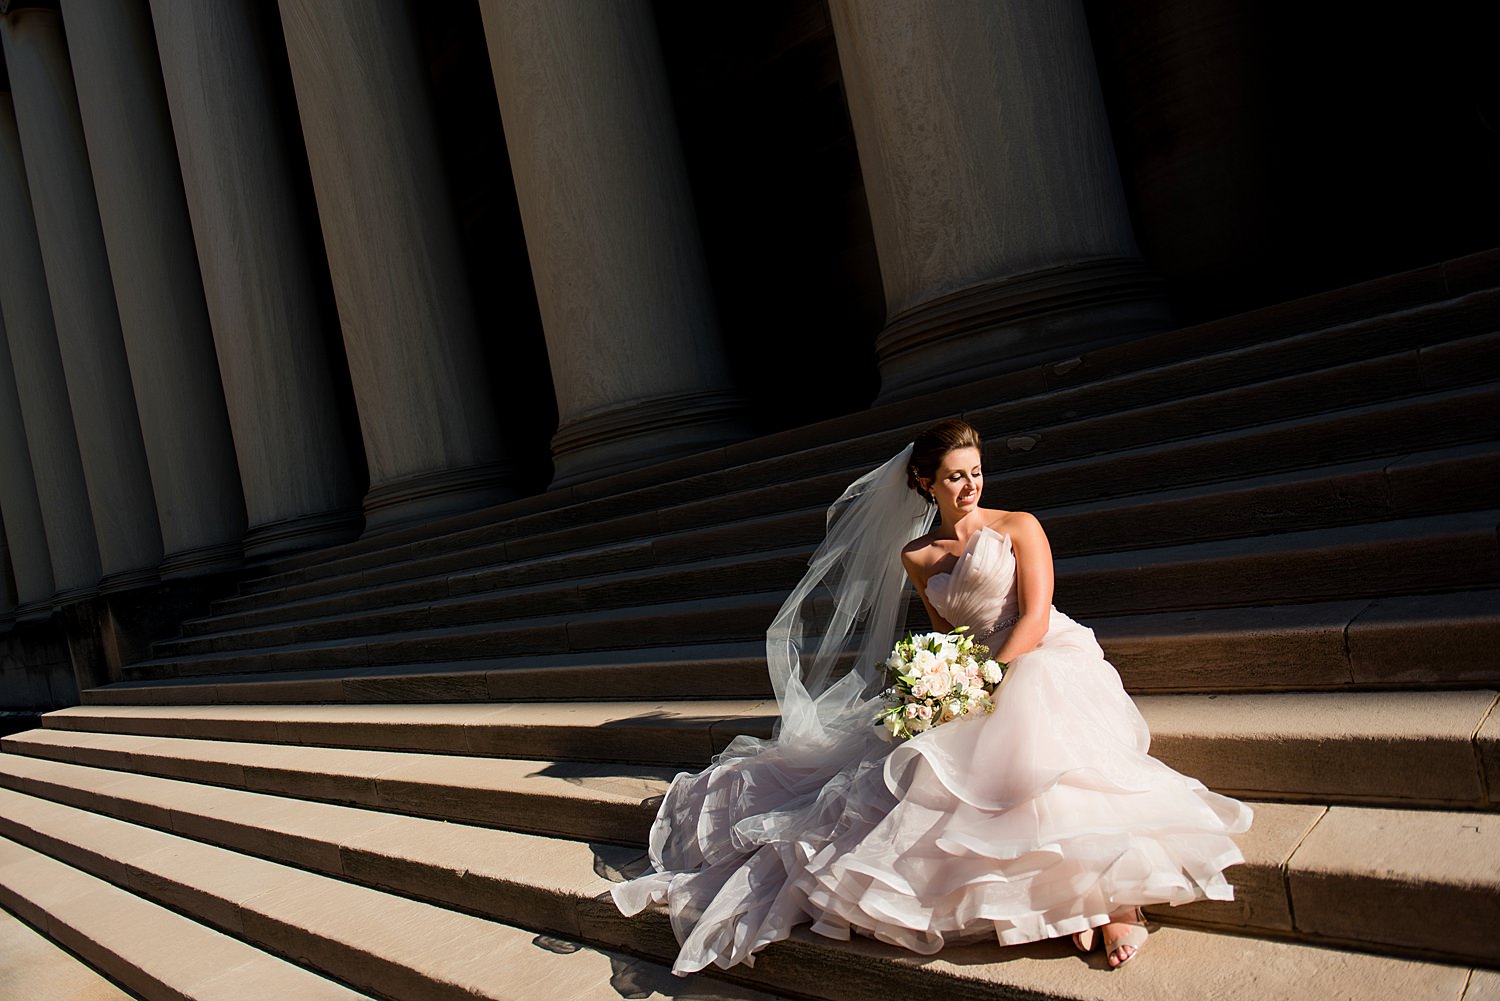 wedding photo on mellon institute pillars in pittsburgh • Recommended Vendors